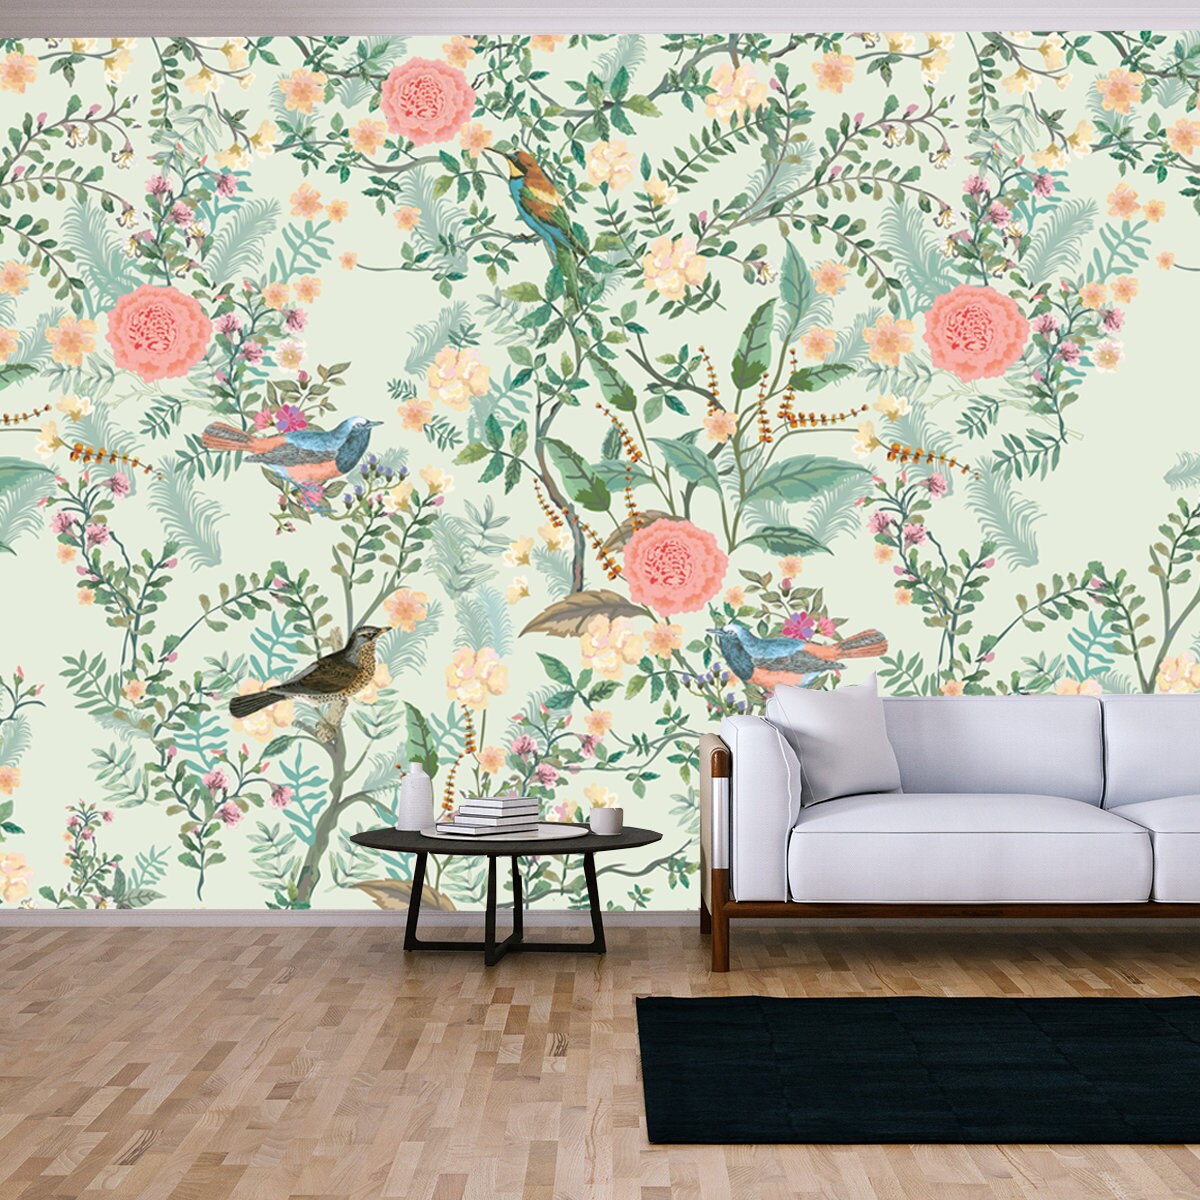 Vintage Decorative Garden Seamless Pattern for Wallpaper. Traditional Flower and Bird Chinoiserie Wallpaper Living Room Mural